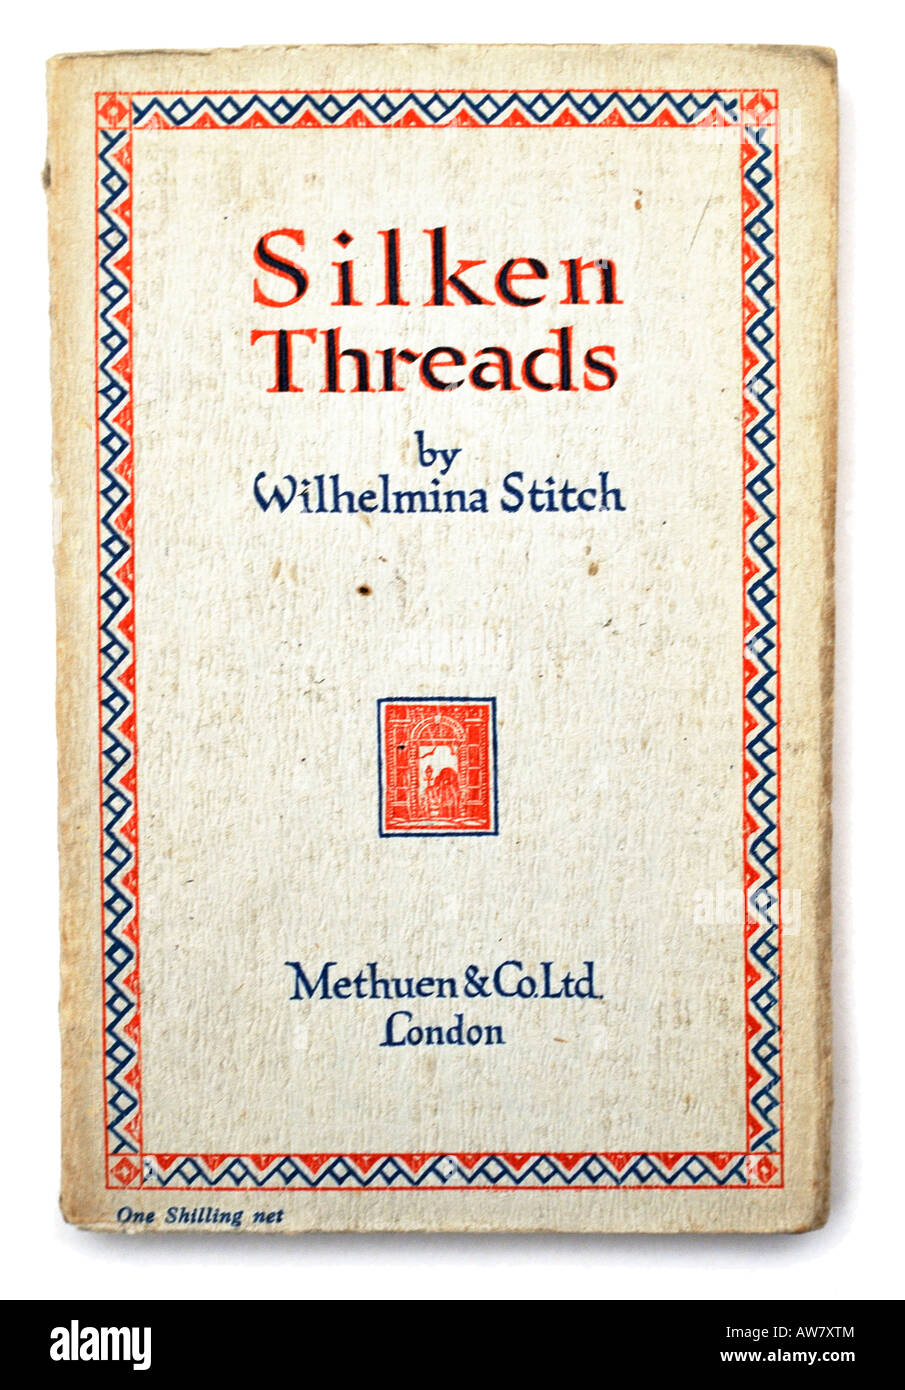 Old Paperback Book Silken Threads by Wilhelmina Stitch EDITORIAL USE ONLY Stock Photo